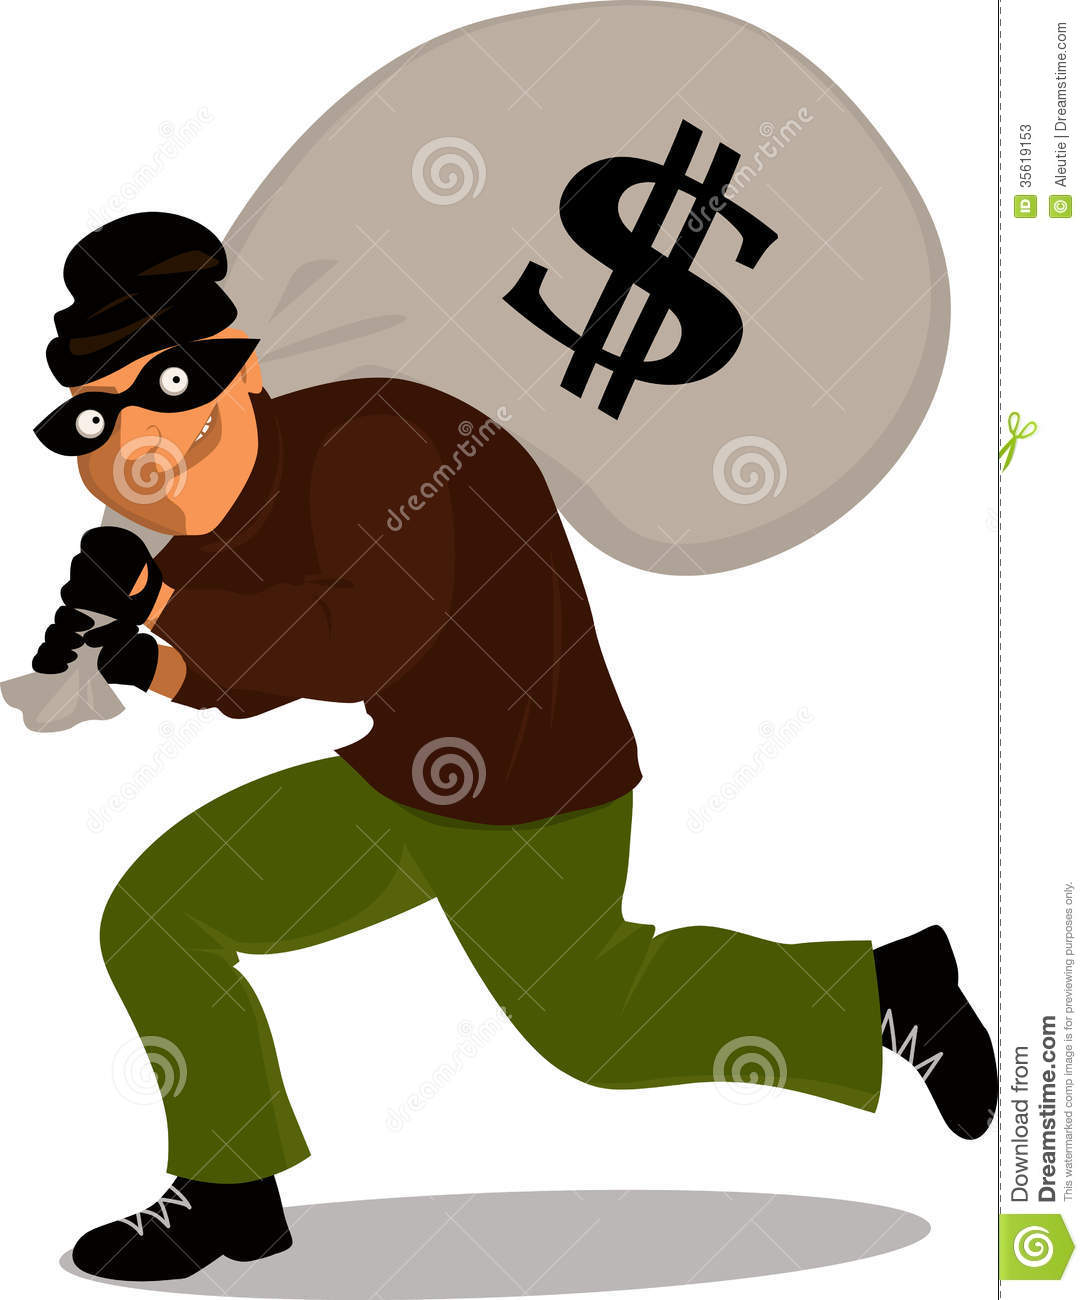 Thief In A Mask Carrying A Money Bag With A Dollar Sign Cartoon 